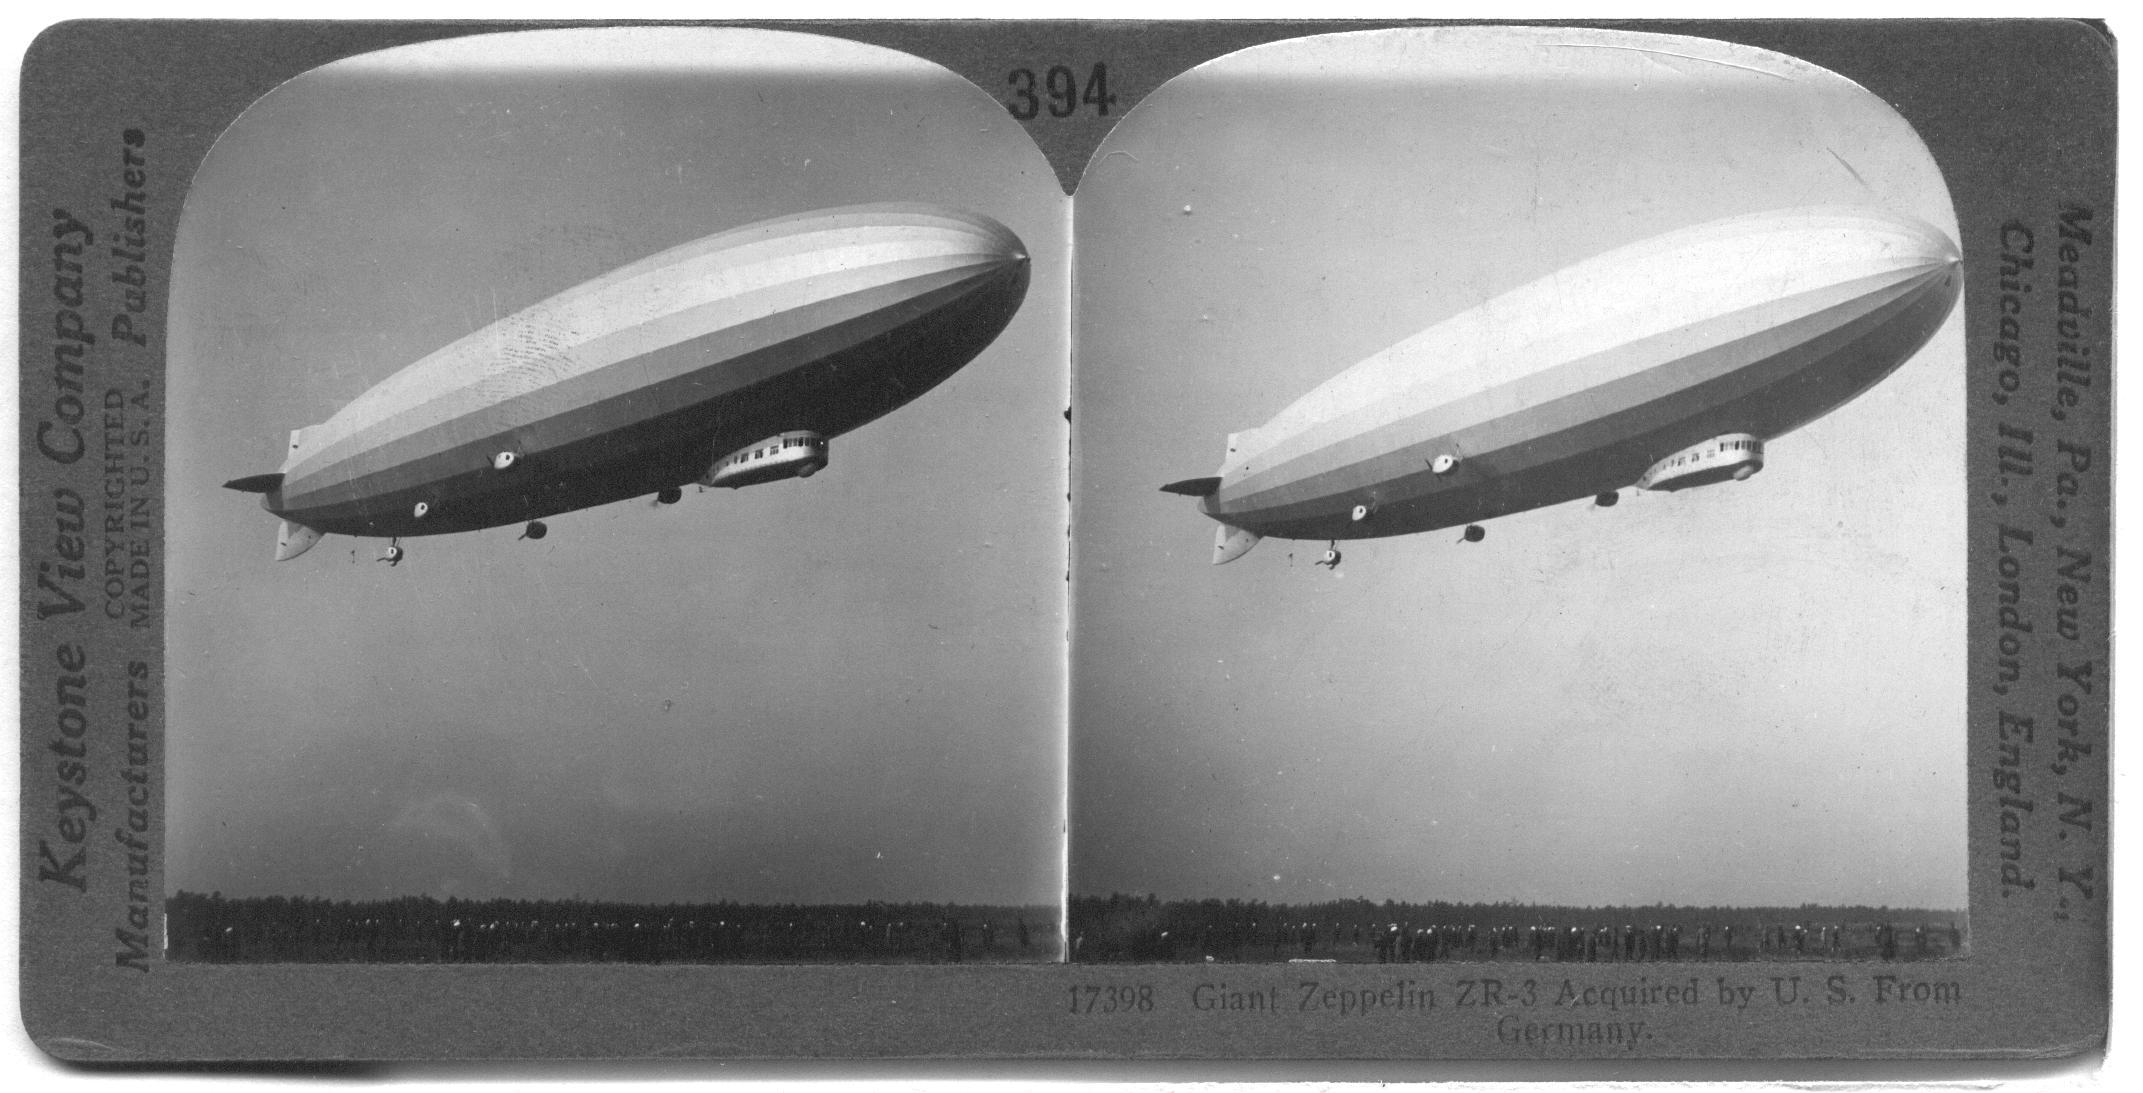 Giant Zeppelin ZR-3 Acquired by U.S. From Germany